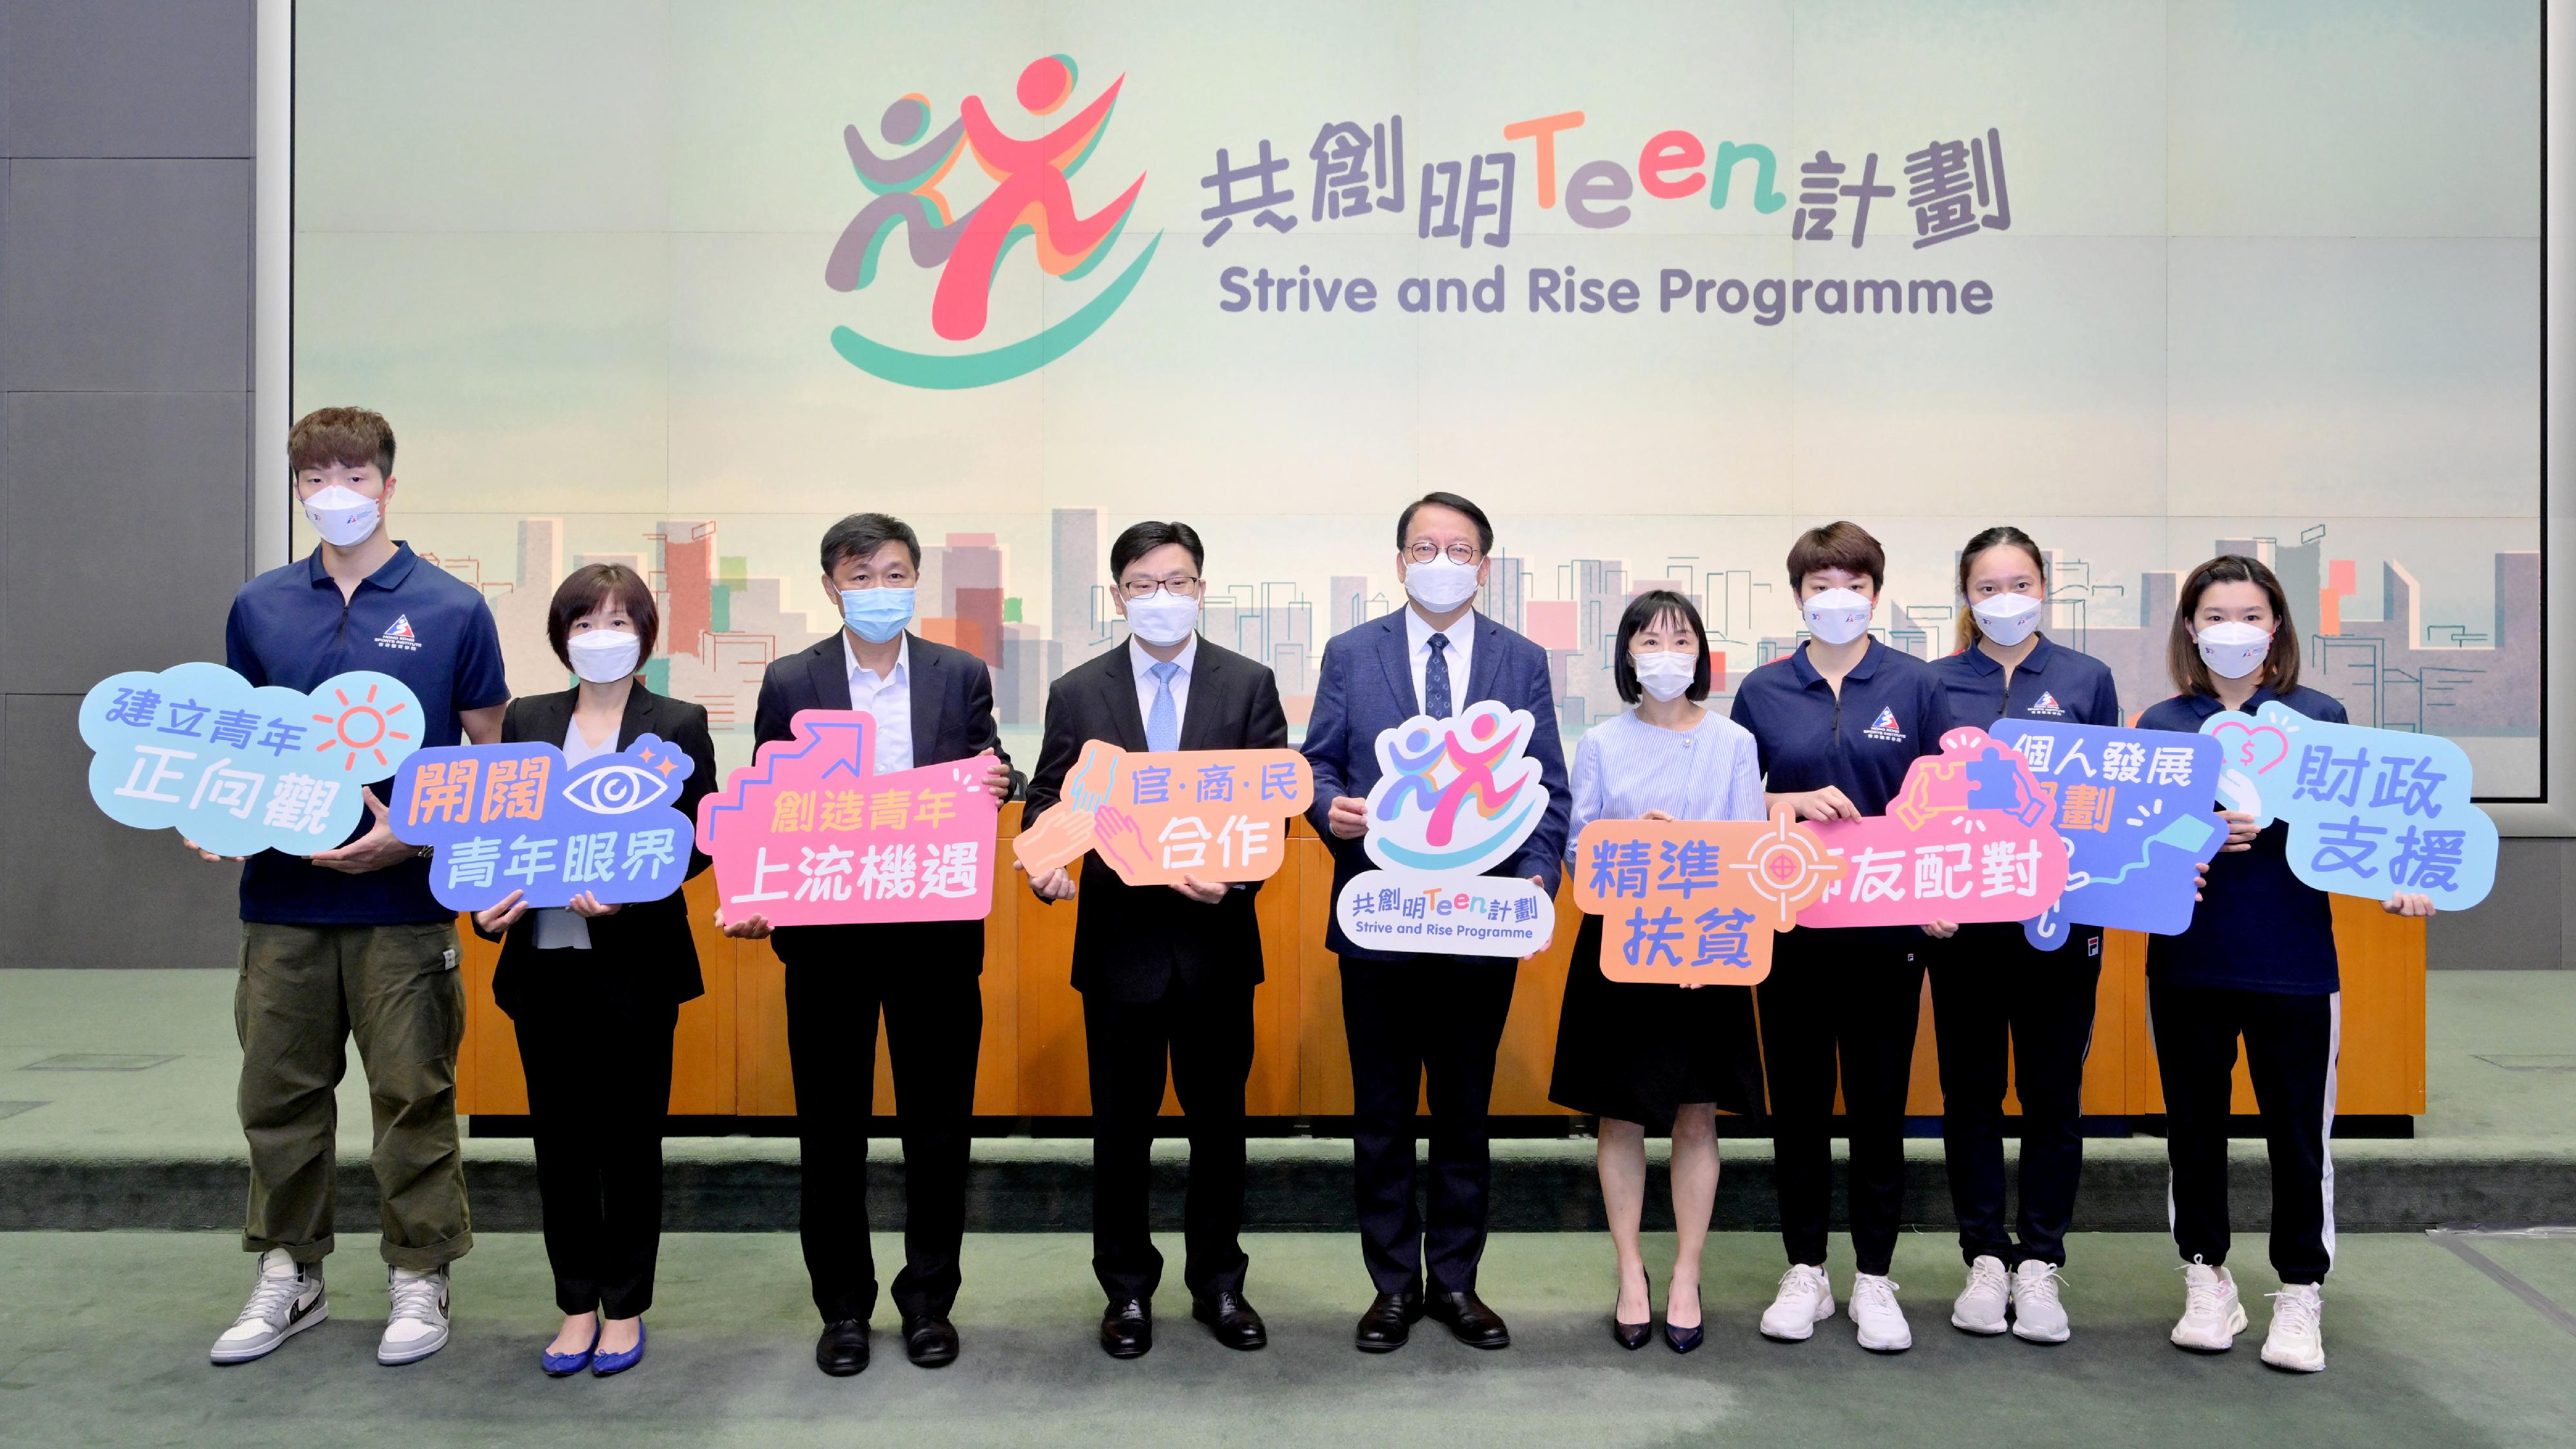 The Chief Secretary for Administration, Mr Chan Kwok-ki, held a press conference today (August 22) on the Strive and Rise Programme launched by the Task Force to Lift Underprivileged Students out of Intergenerational Poverty at the Central Government Offices, Tamar. Photo shows the following at the press conference: Mr Chan (centre); the Secretary for Labour and Welfare, Mr Chris Sun (fourth left); the Director of Social Welfare, Miss Charmaine Lee (fourth right); Star Mentors of the programme - the founding chairman of the Hong Kong Harmonica Association and the Chief of Service of the Department of Orthopaedic & Traumatology of Prince of Wales Hospital, Dr Ho Pak-cheong (third left); the Associate Dean and Associate Professor of the Faculty of Education of The University of Hong Kong, Dr Lo Yuen-yi (second left); and elite athletes Cheung Ka-long (first left), Doo Hoi-kem (third right), Soo Wai-yam (second right), and Lee Ho-ching (first right).